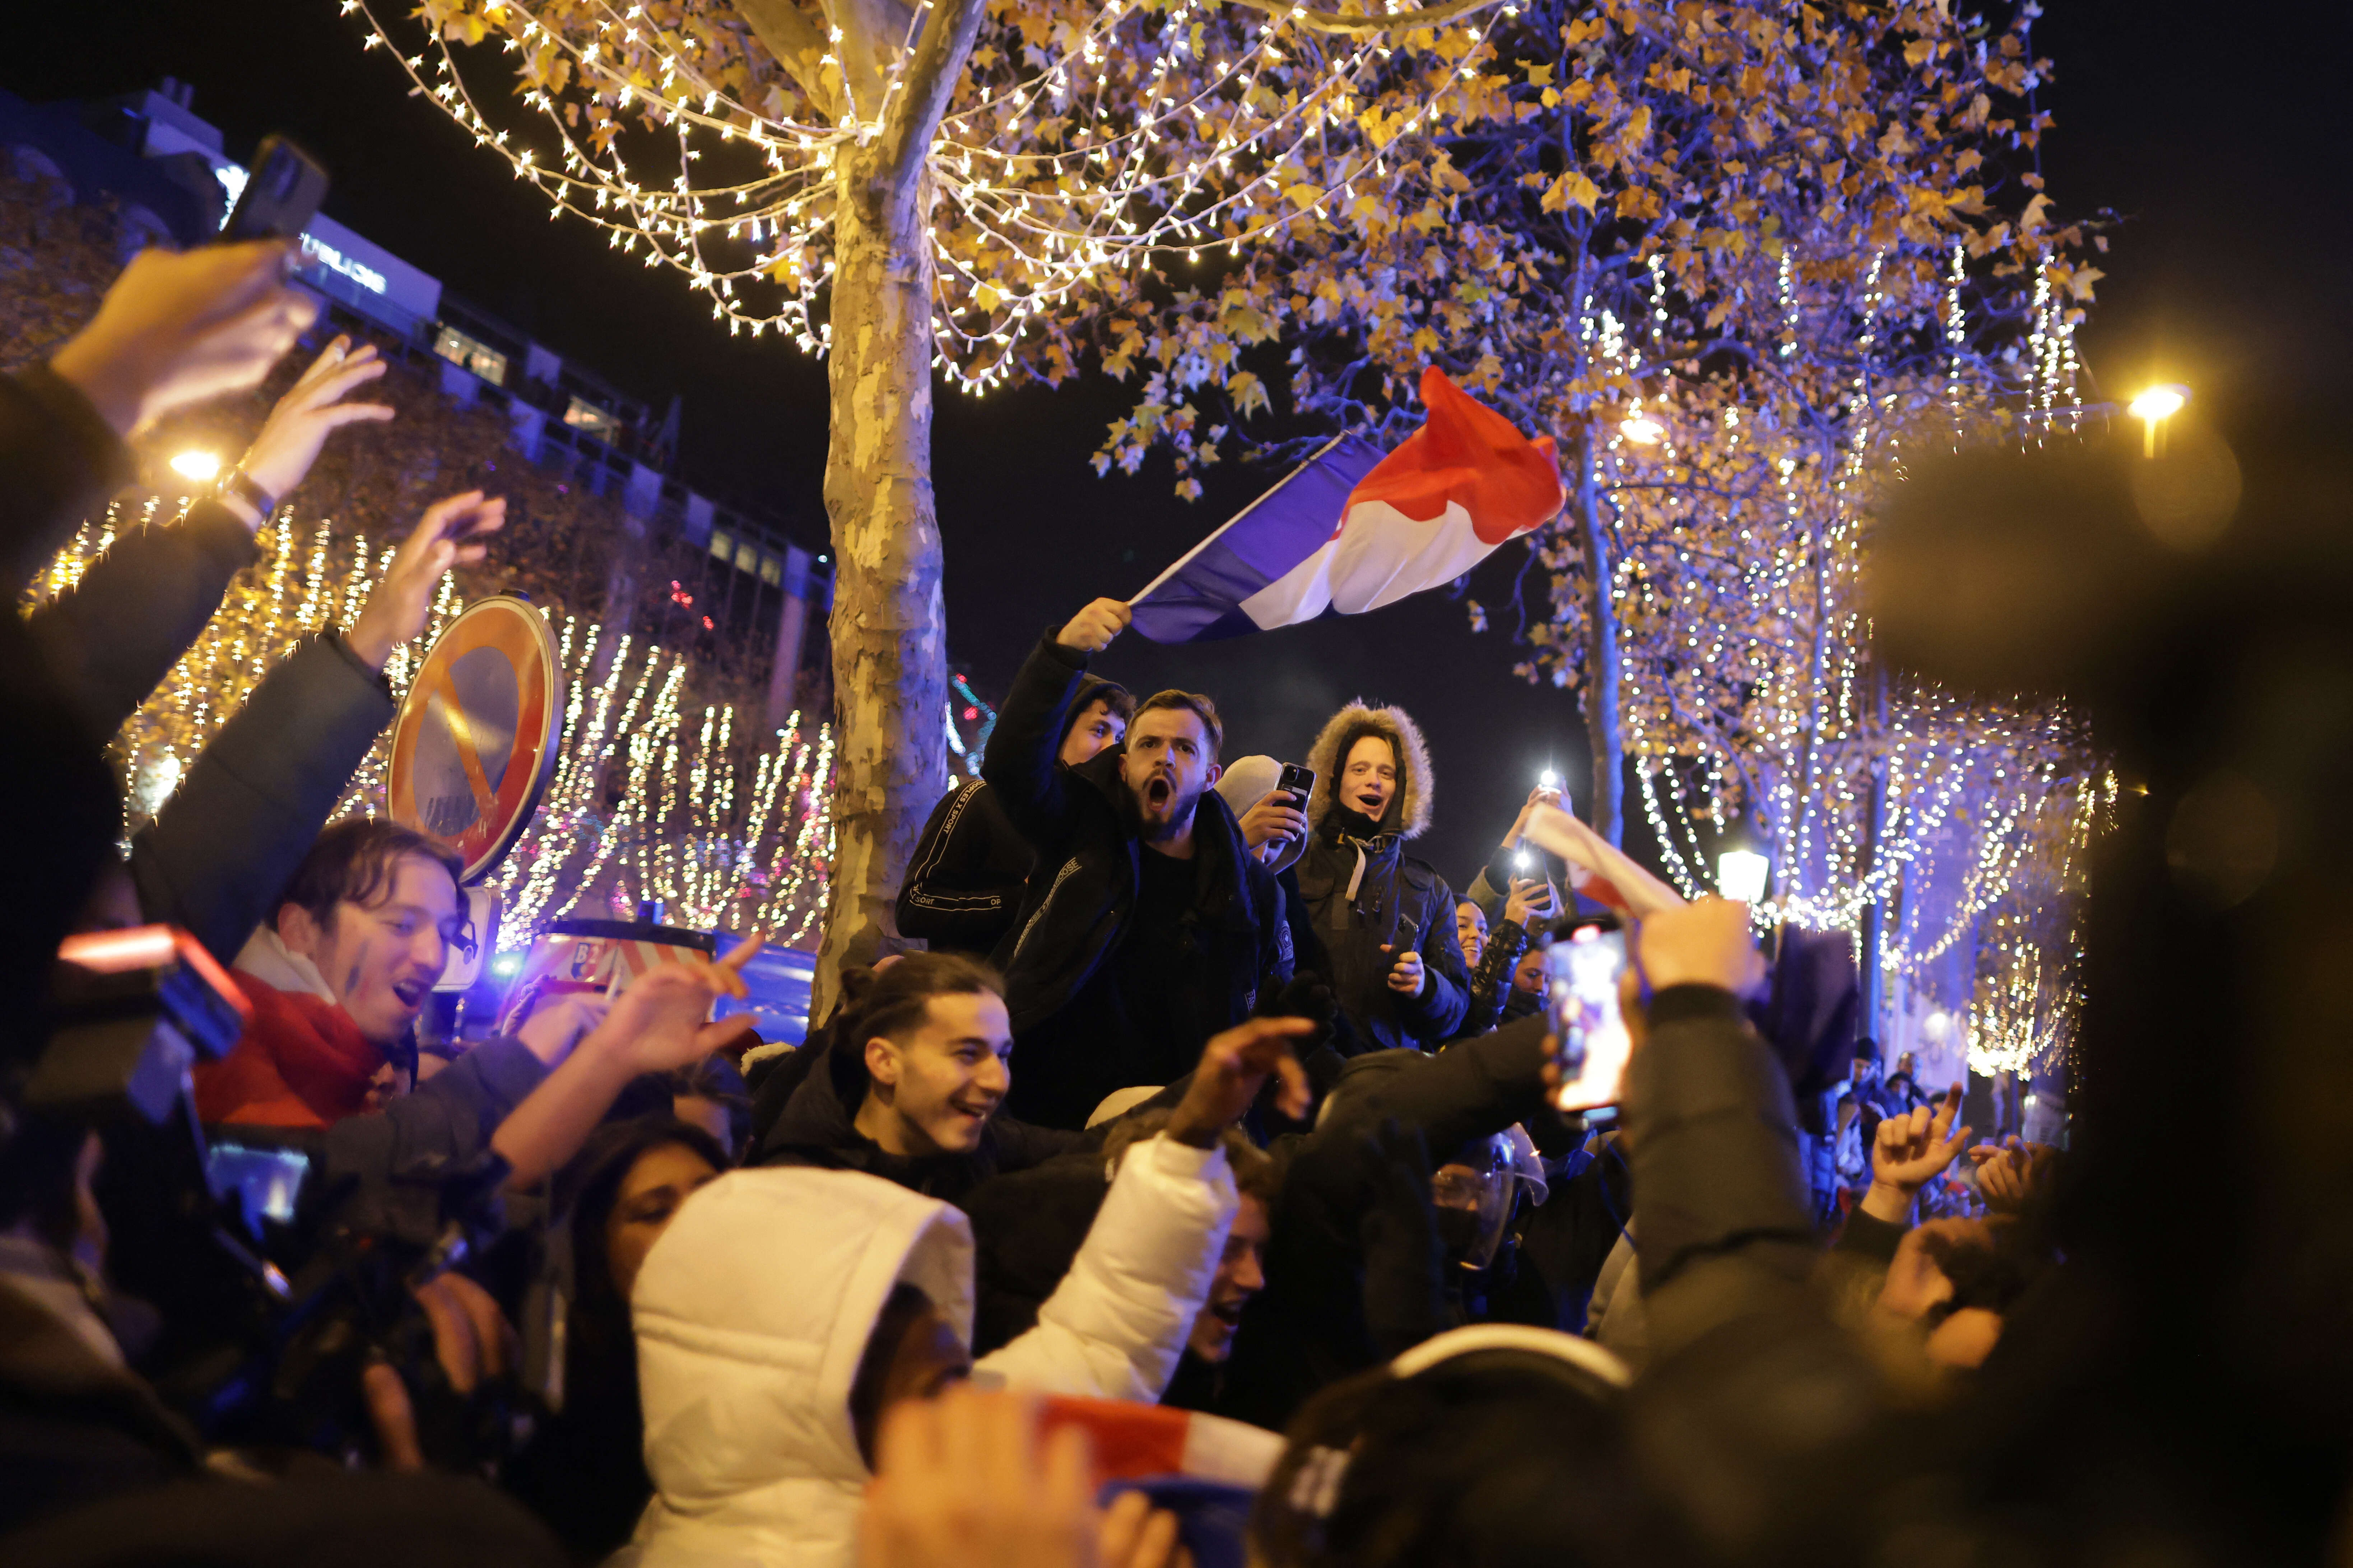 A football fan holds the French flag as he celebrates after France's victory over Morocco in the Qatar 2022 World Cup semi-final, on the Champs-Elysees in Paris on December 14, 2022. (Photo by Thibaud MORITZ / AFP)